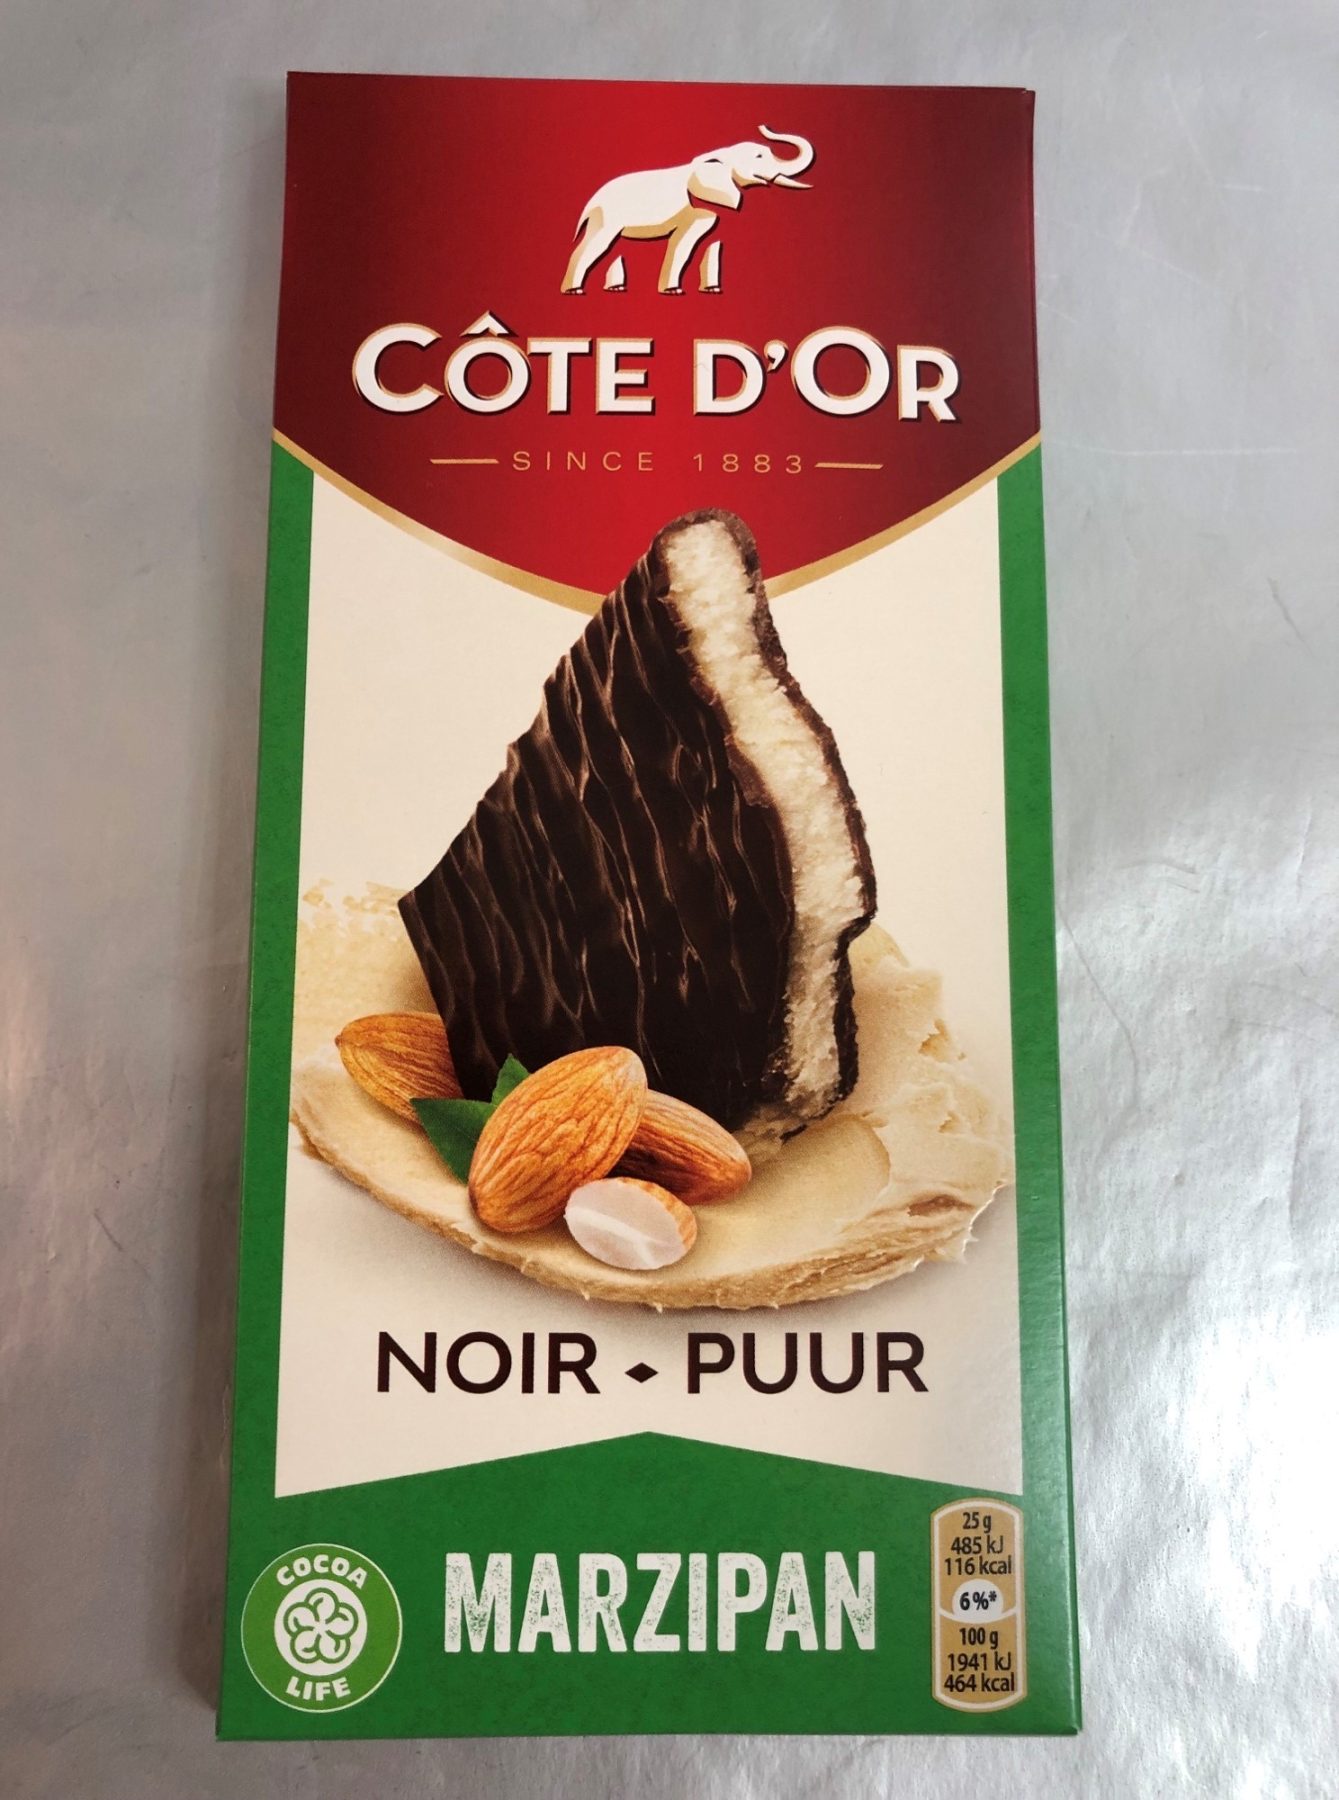 Cote D'Or dark chocolate with marzipan